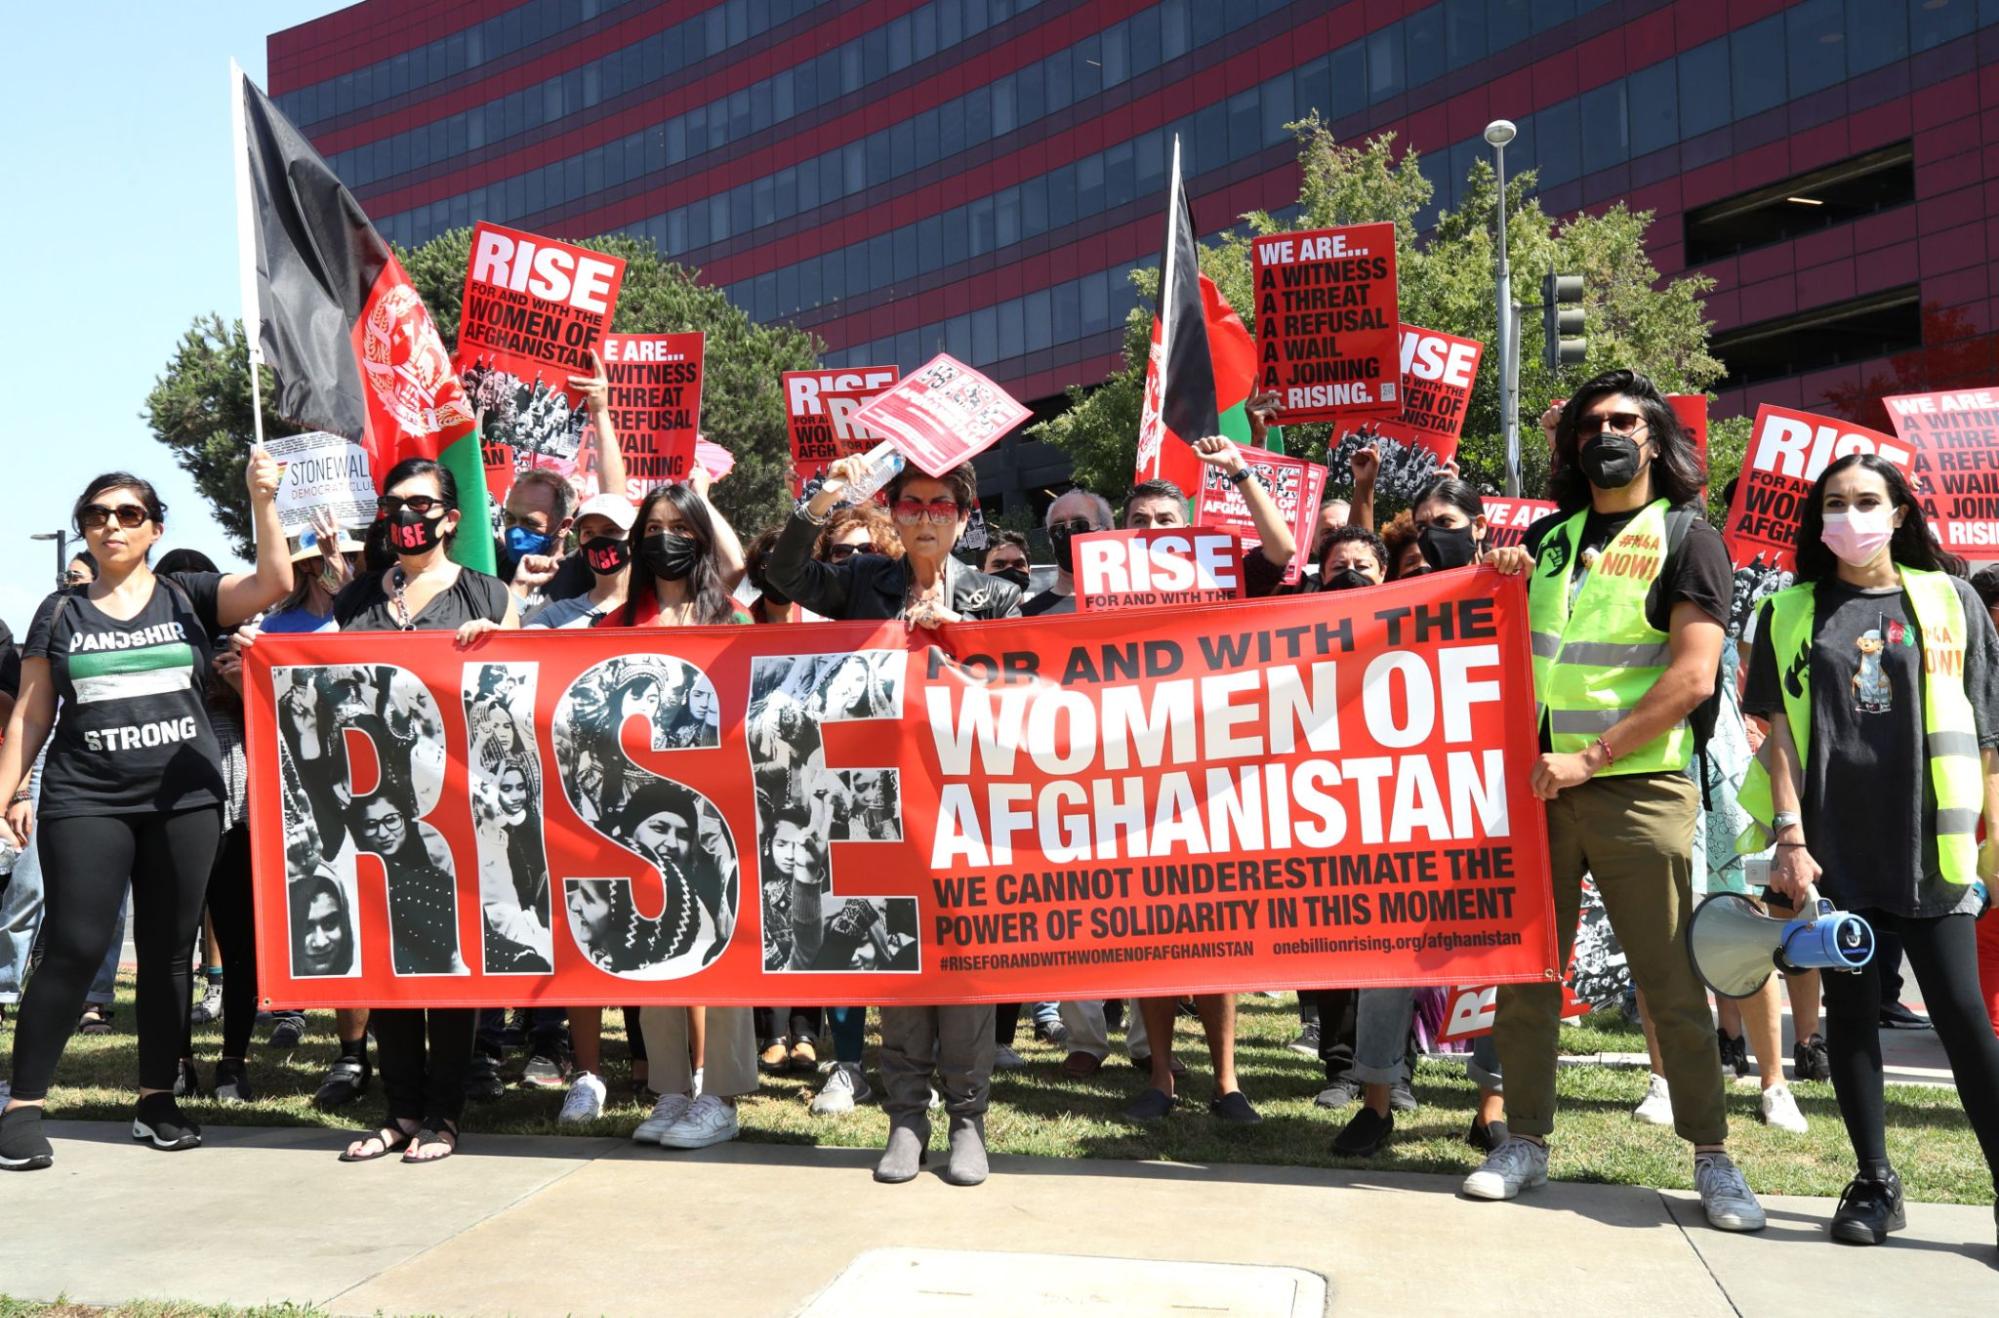 Why I as a Black Woman Should Care About Afghanistan